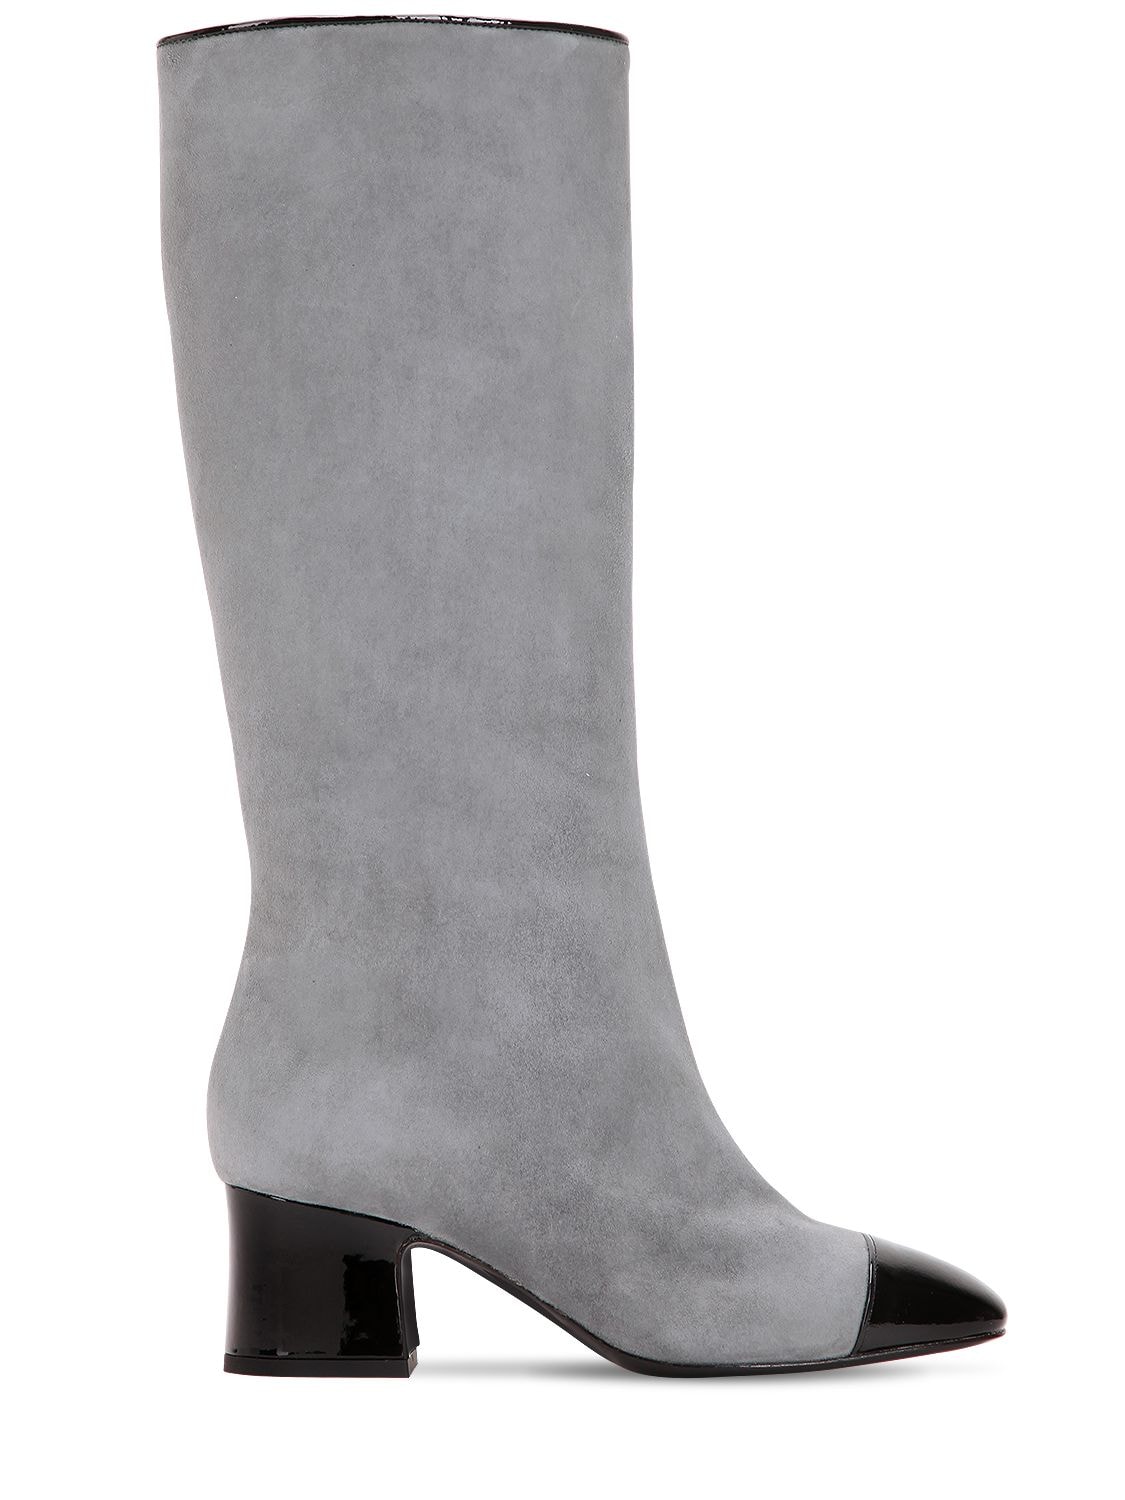 Aand 60mm Suede & Patent Leather Tall Boots In Grey,black